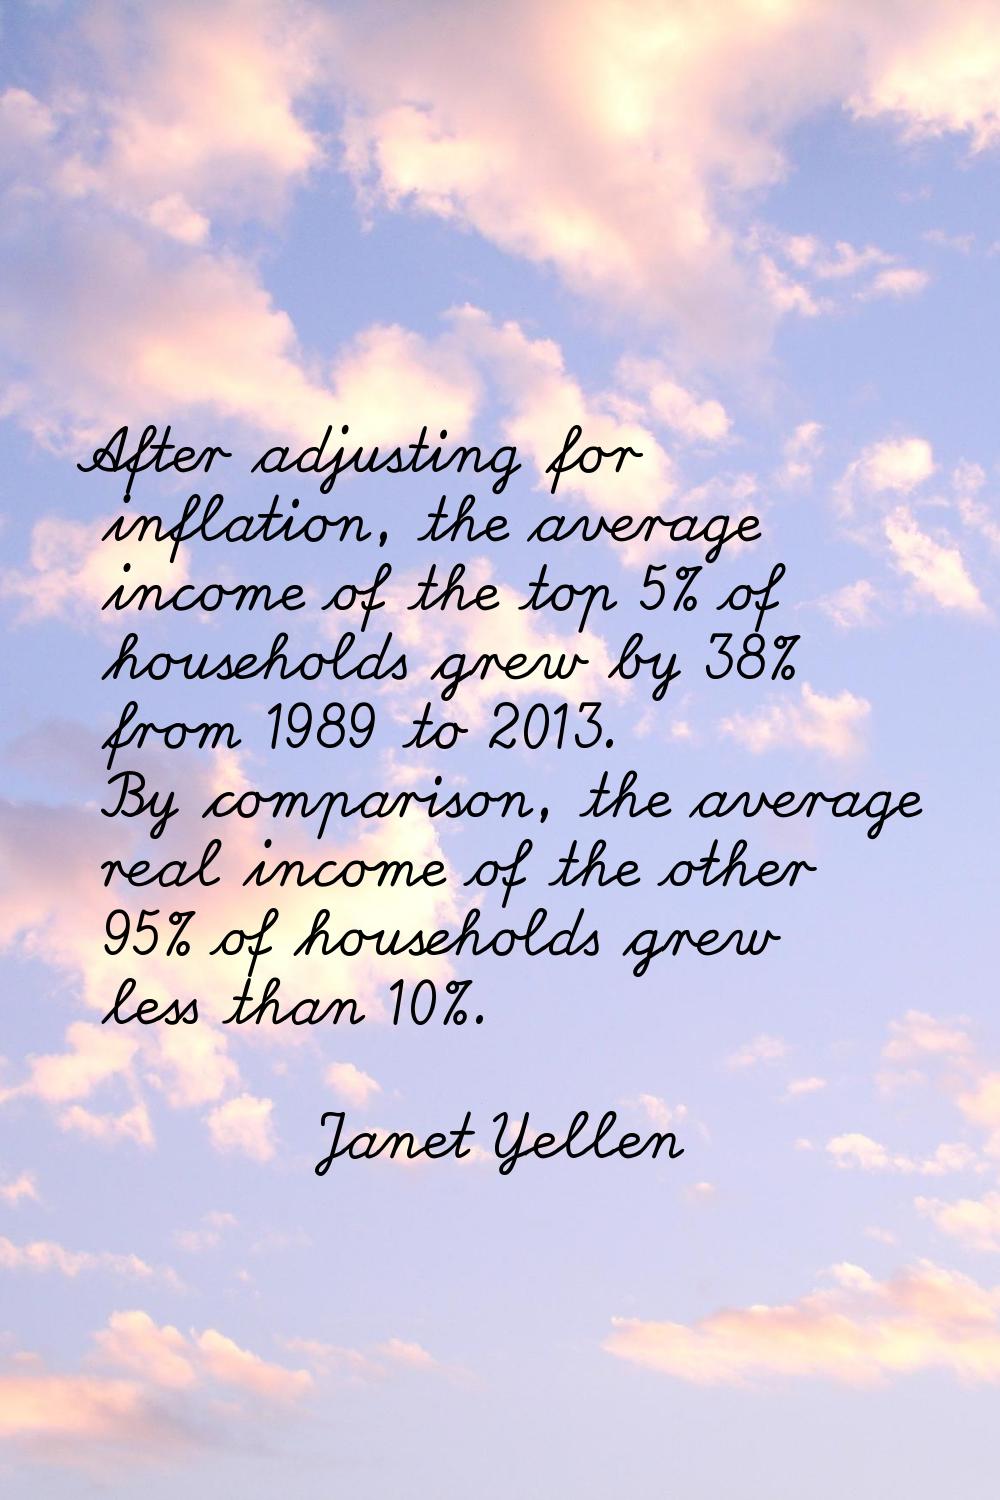 After adjusting for inflation, the average income of the top 5% of households grew by 38% from 1989